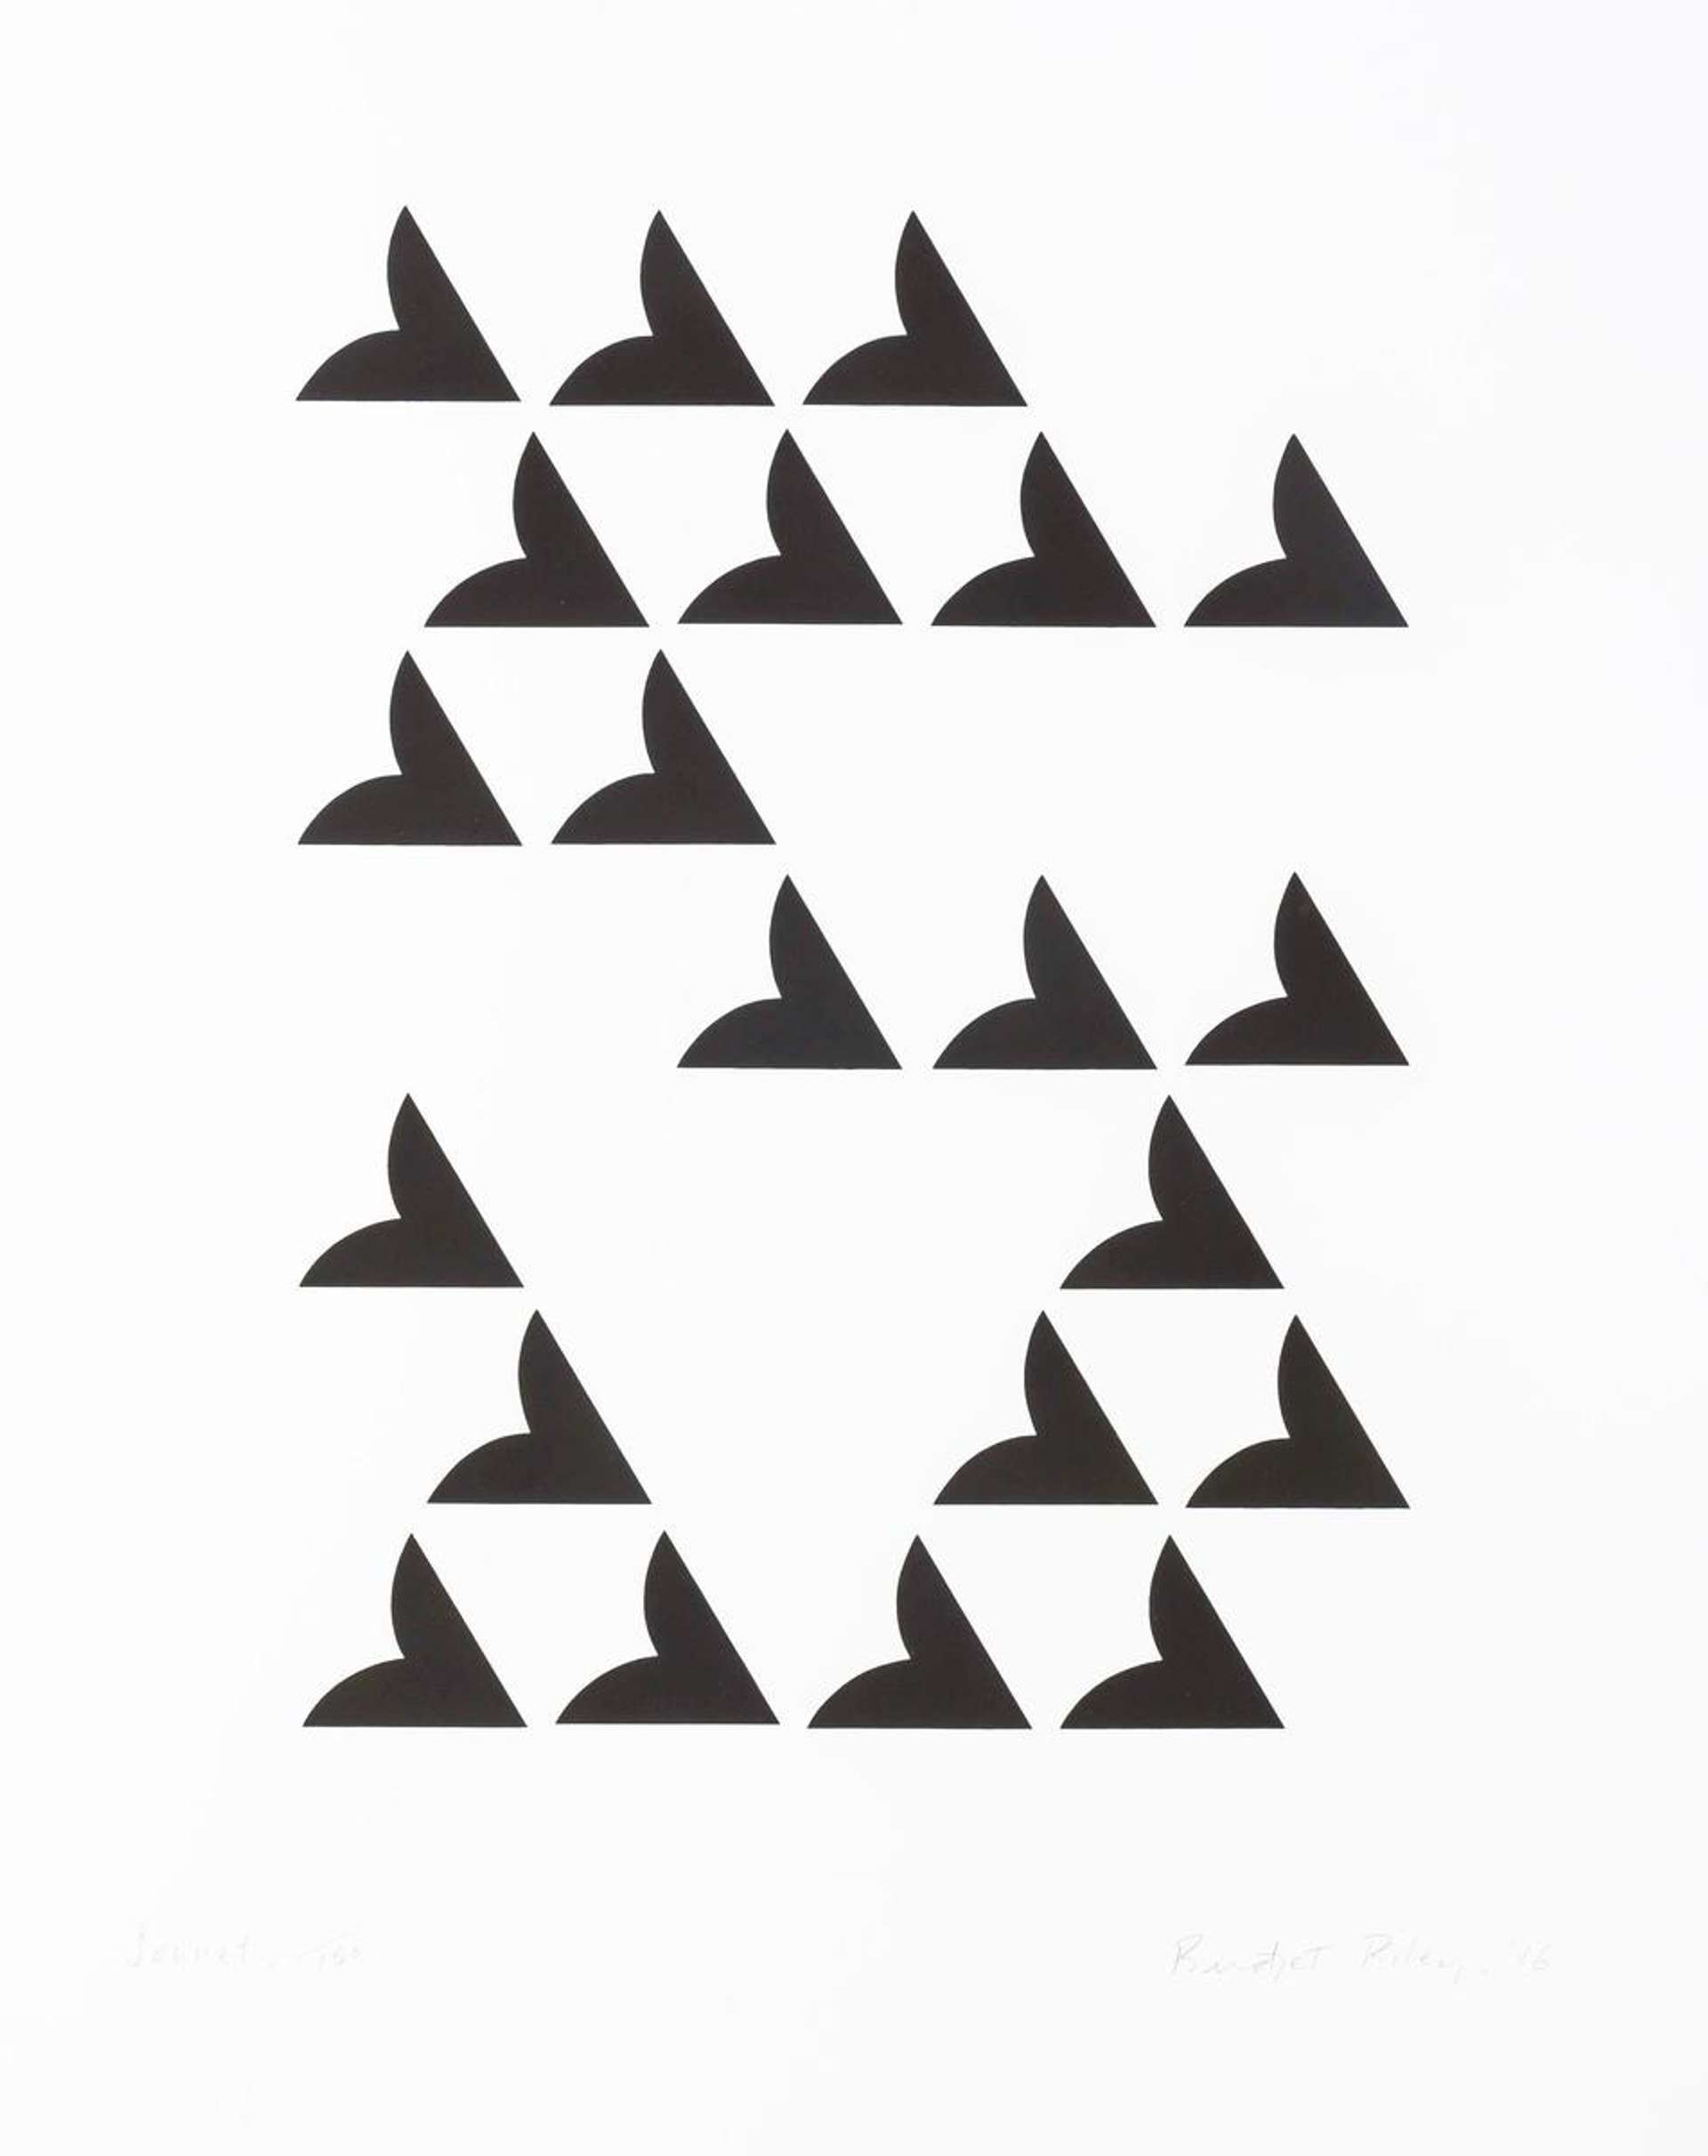 Arranged in a horizontal, vertical or diagonal configuration, depending on one’s perception, the triangular shapes forming Sonnet have a winged left-hand edge. 